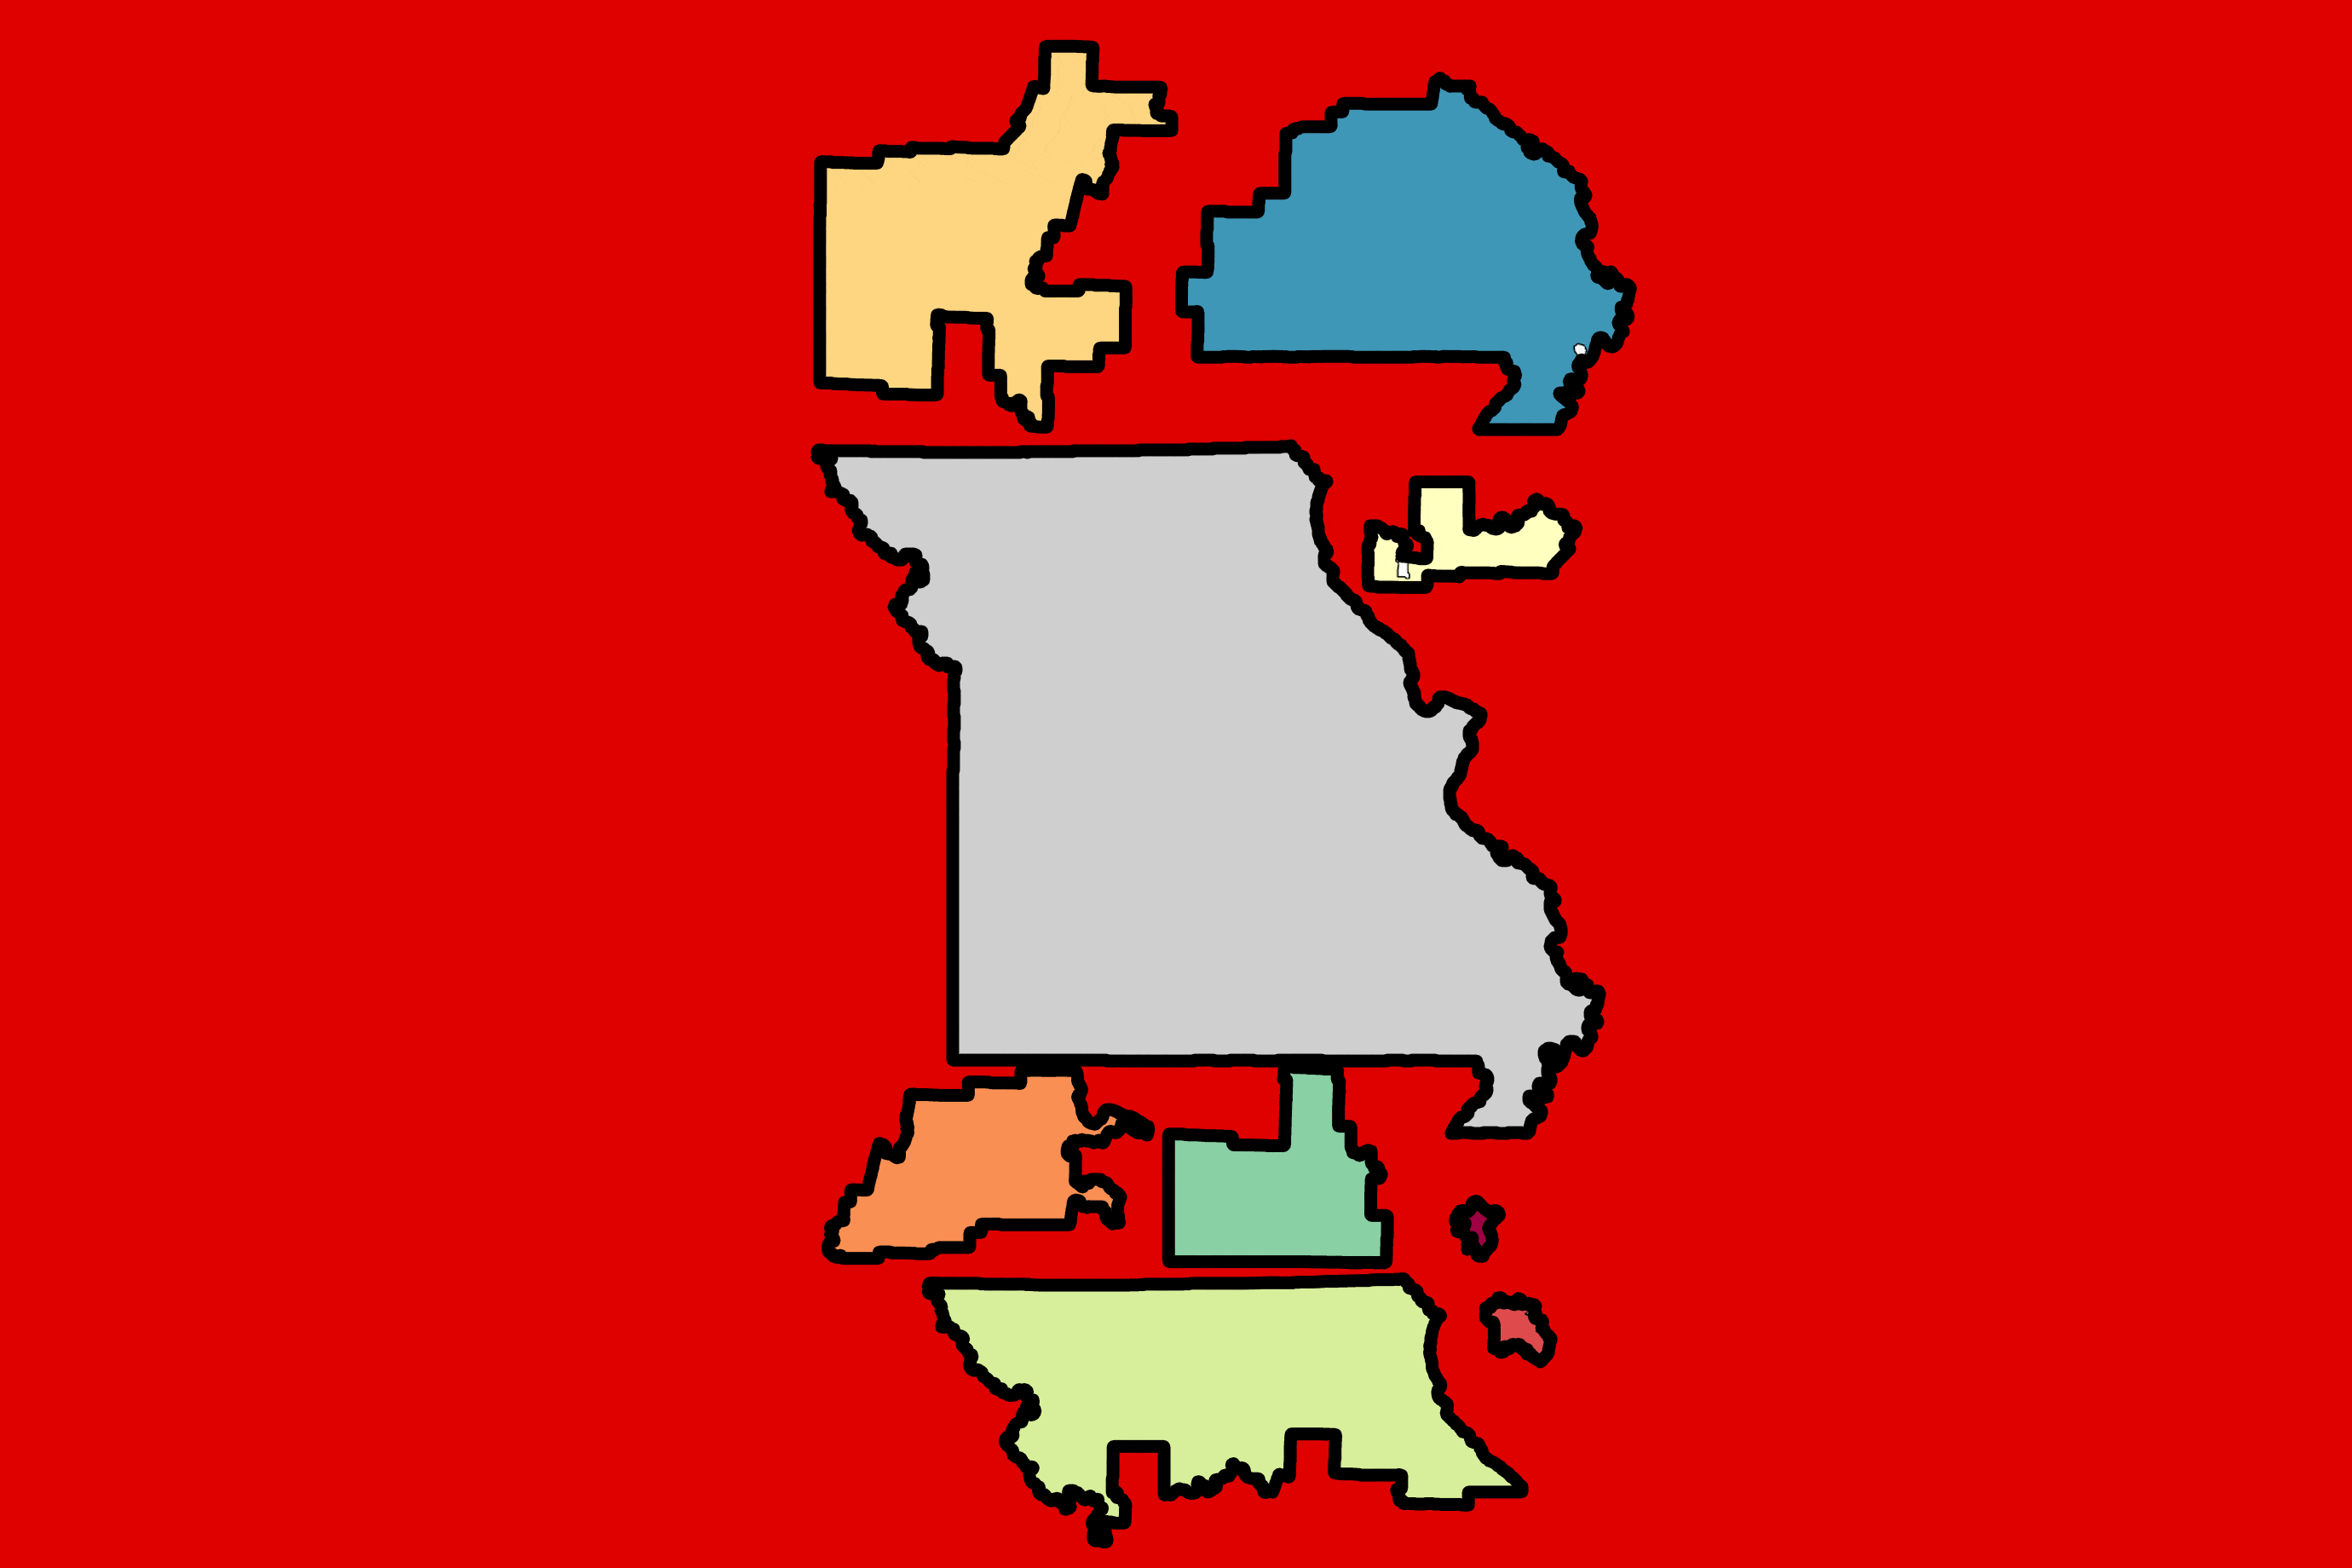 A map of Missouri with districts shown as puzzle pieces fitting within the state's borders